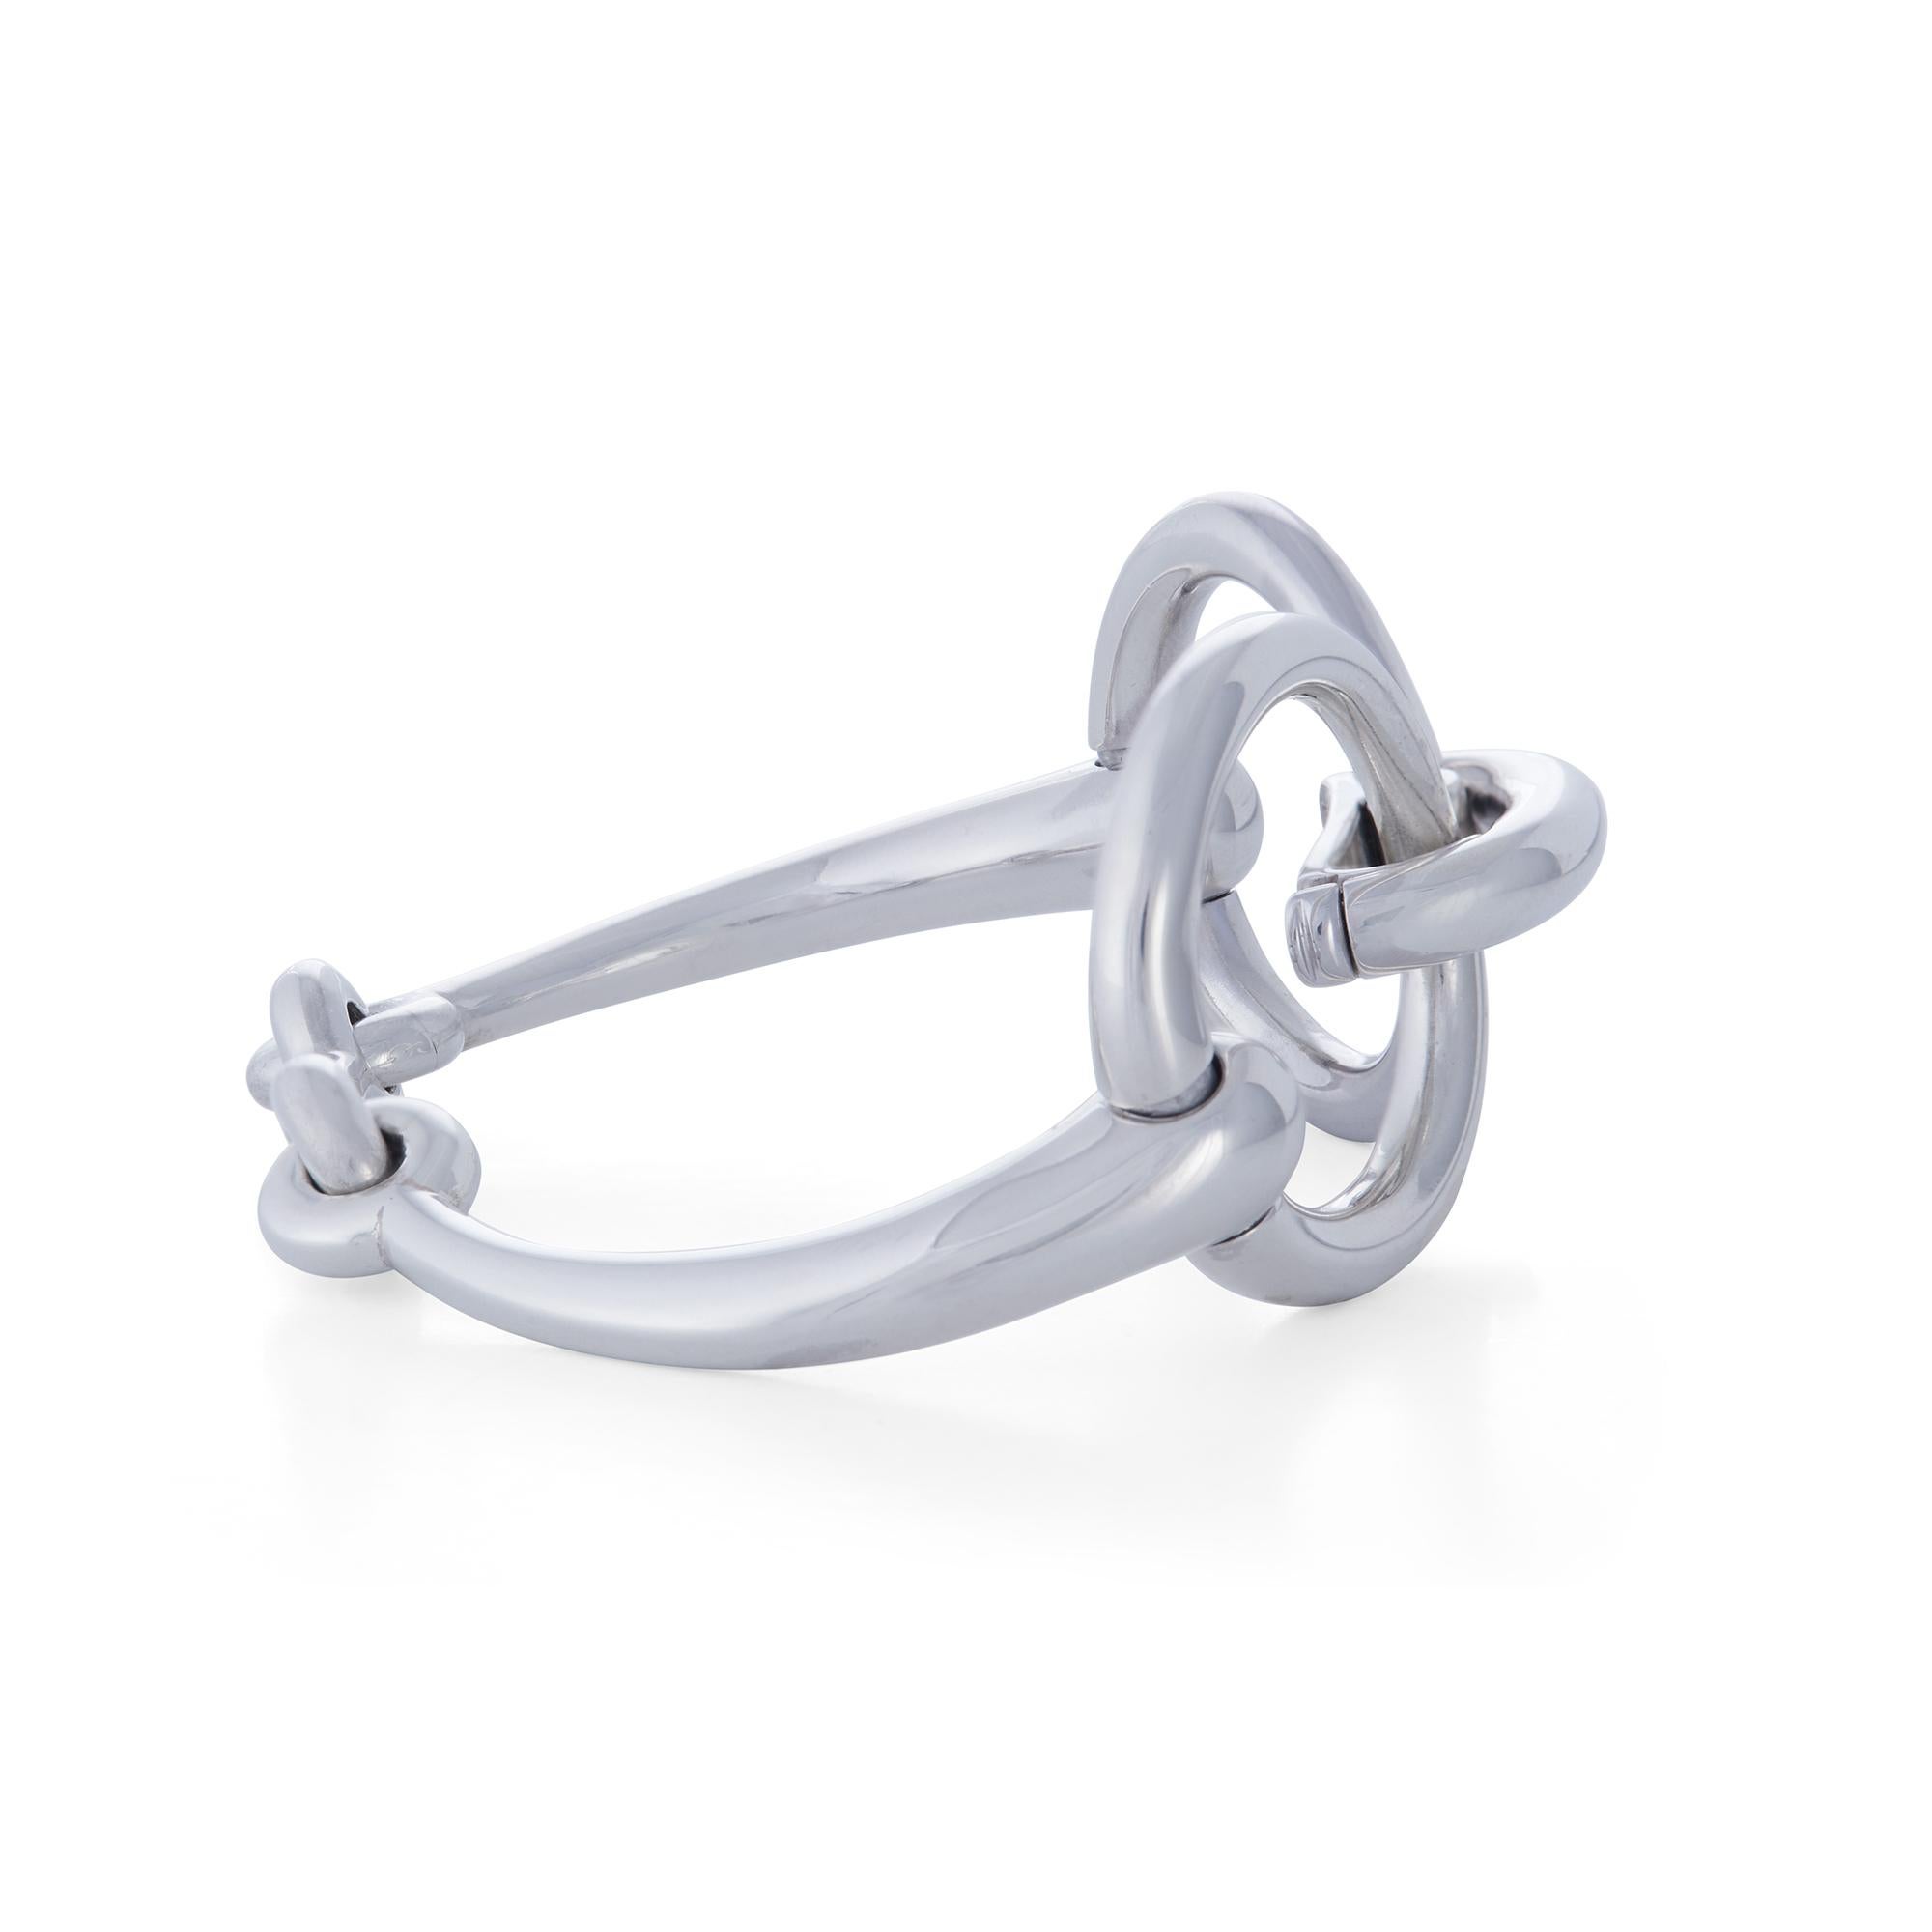 Authentic Hermès Filet de Selle bracelet crafted in sterling silver. Featuring the brand's iconic horsebit design, the finely crafted silver hugs the wrist comfortably for everyday wear.  The bracelet measures 6.5 inches in length.  Signed Hermès,